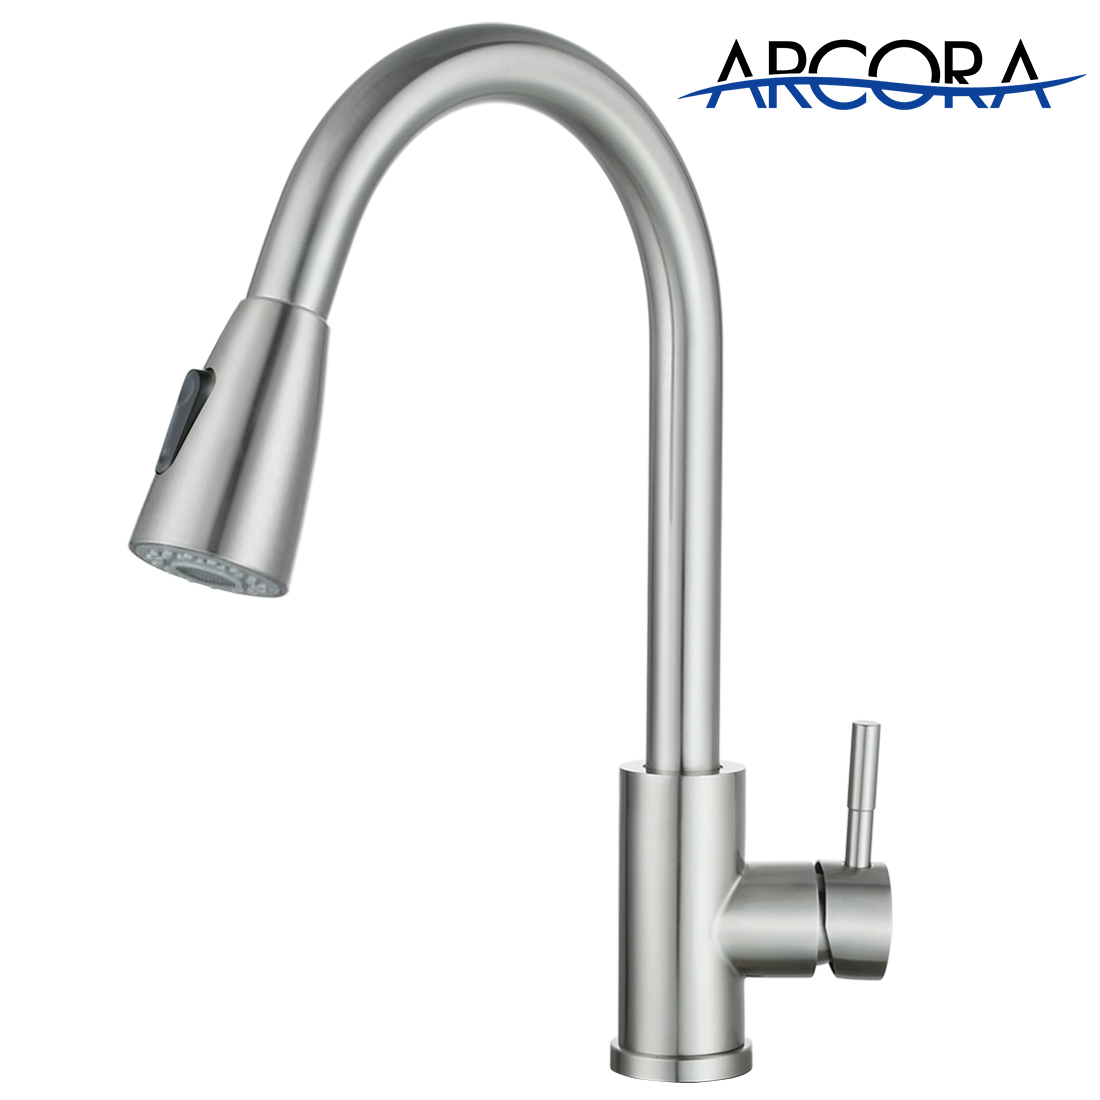 Arcora Brushed Steel Kitchen Mixer Tap Pull Out Spray